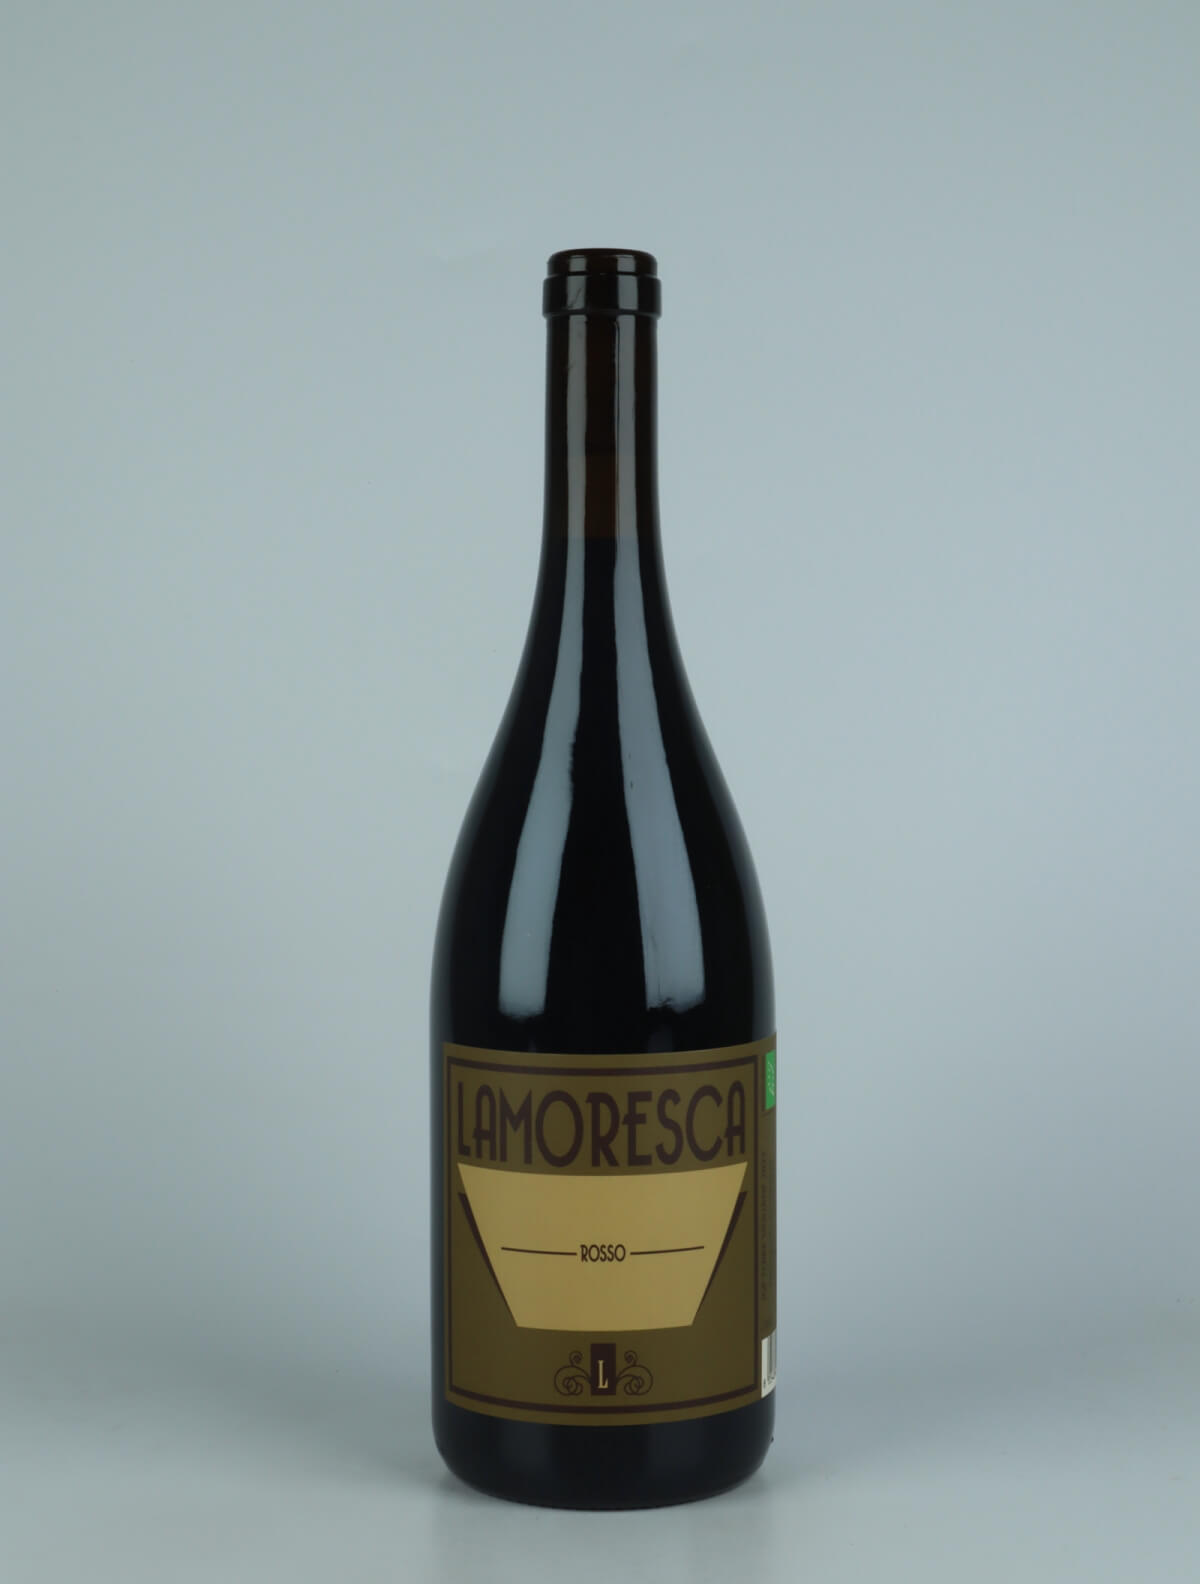 A bottle 2022 Rosso Red wine from Lamoresca, Sicily in Italy